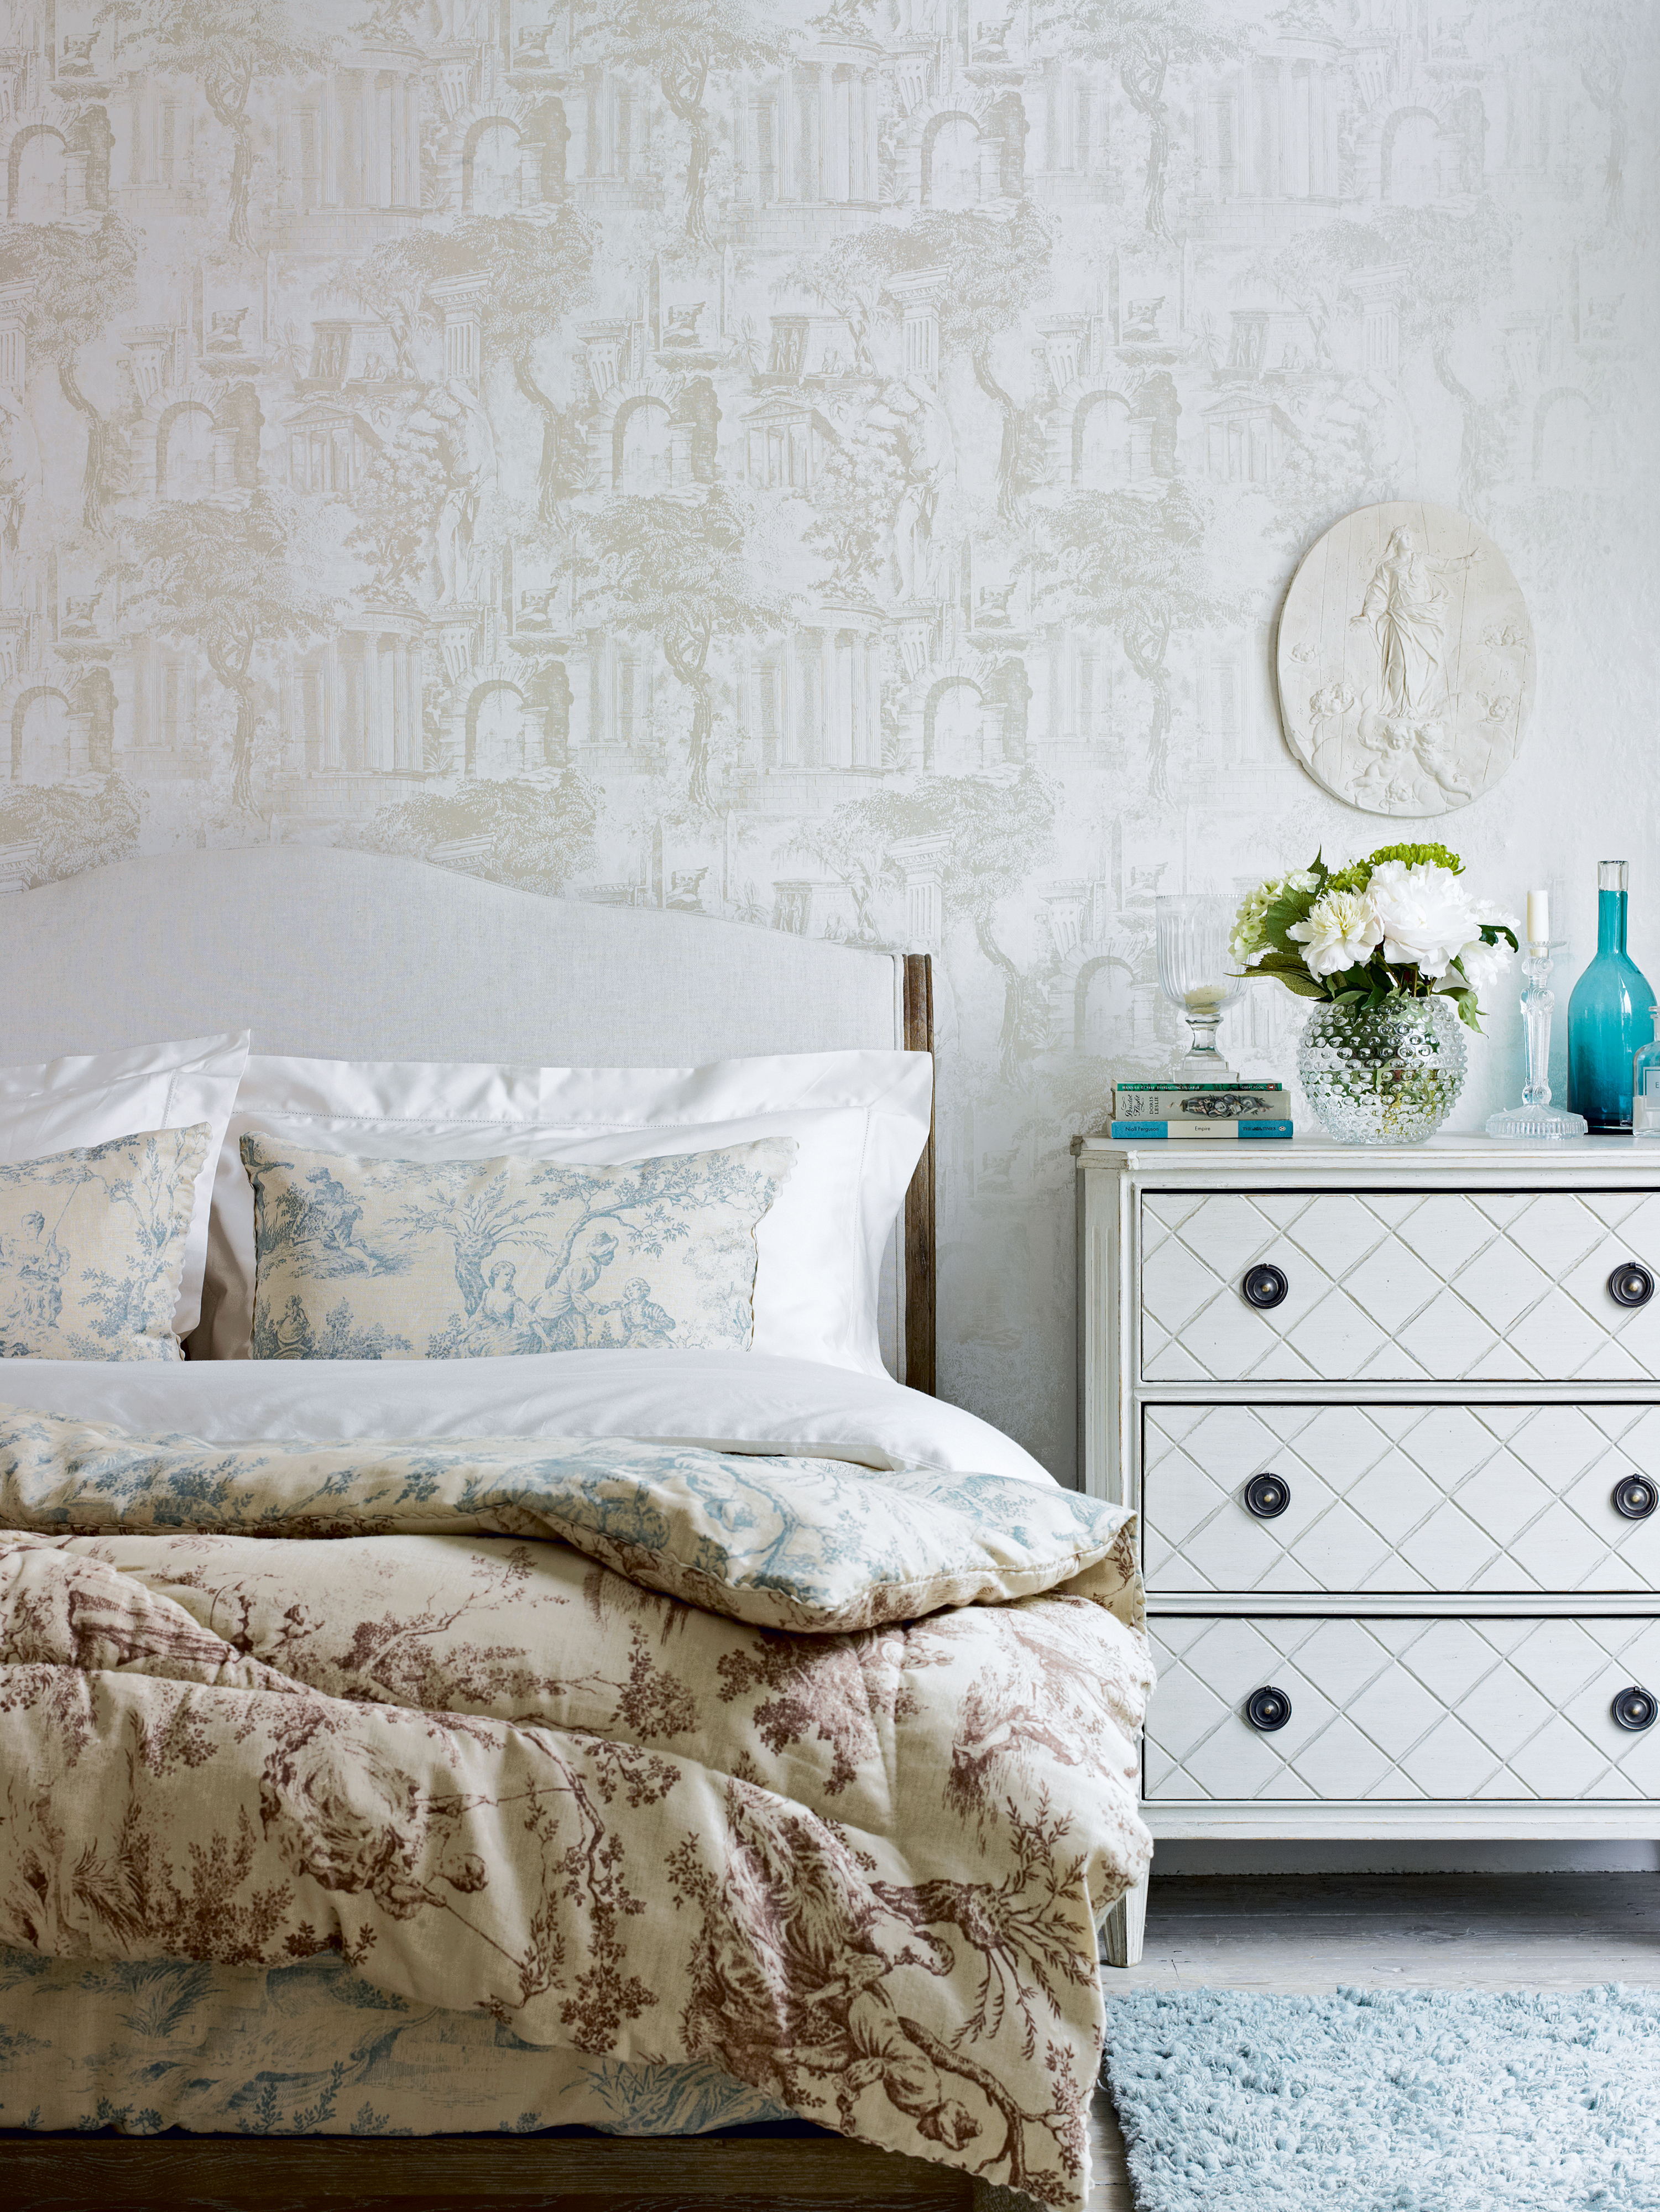 French-style bedroom with floral bed linen and antique style wallpaper